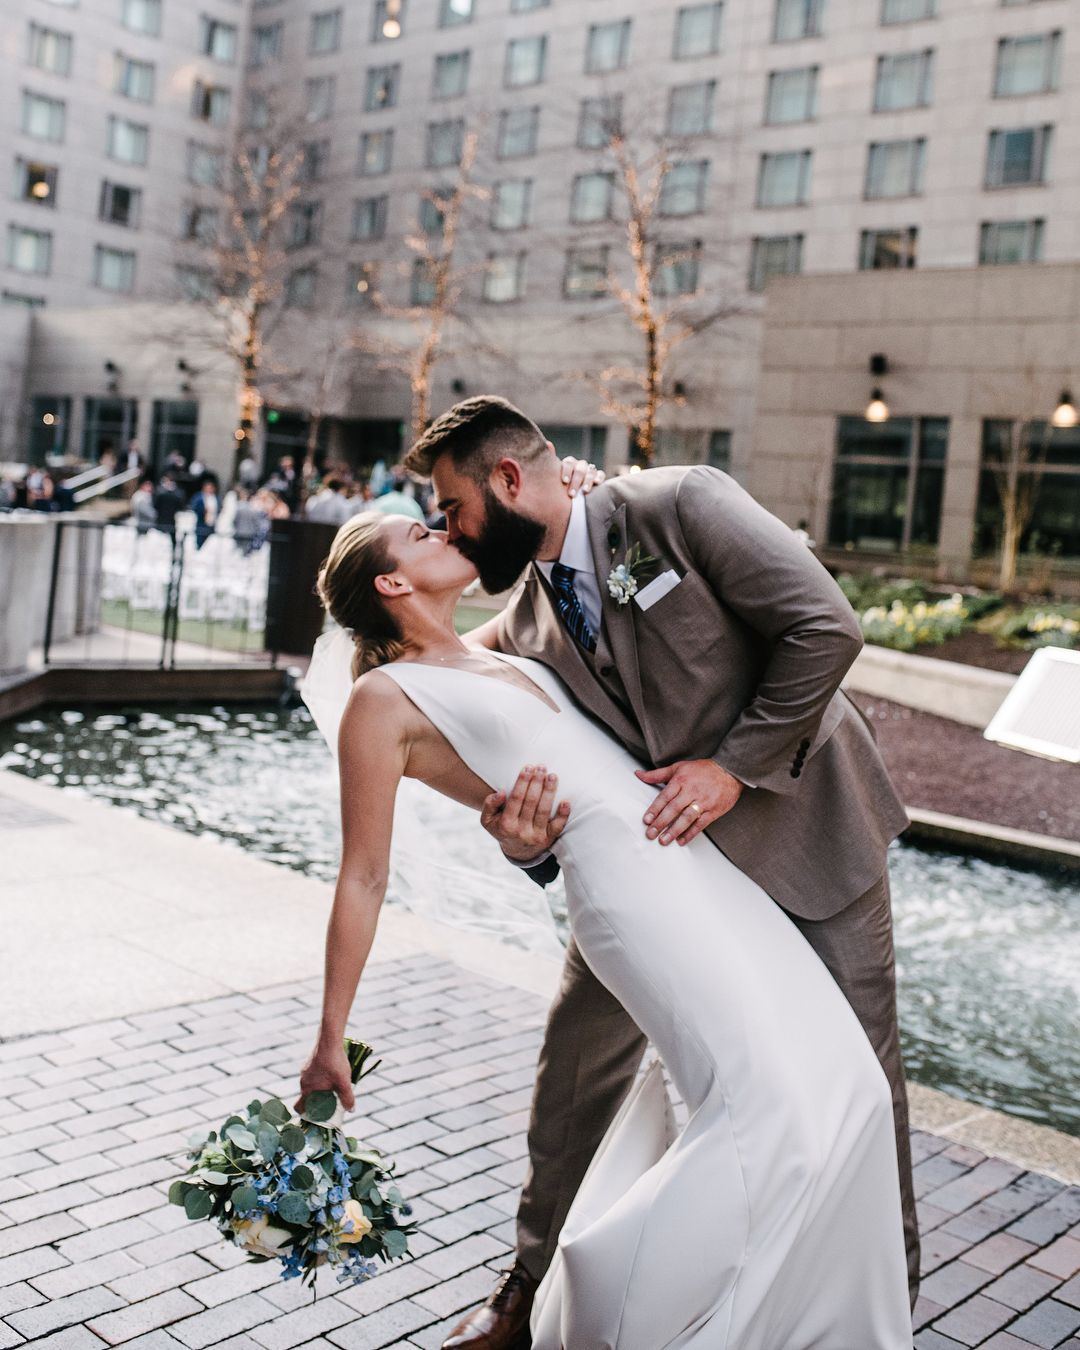 Kylie McDevitt and Jason Kelce got married after being in a relationship for three years.